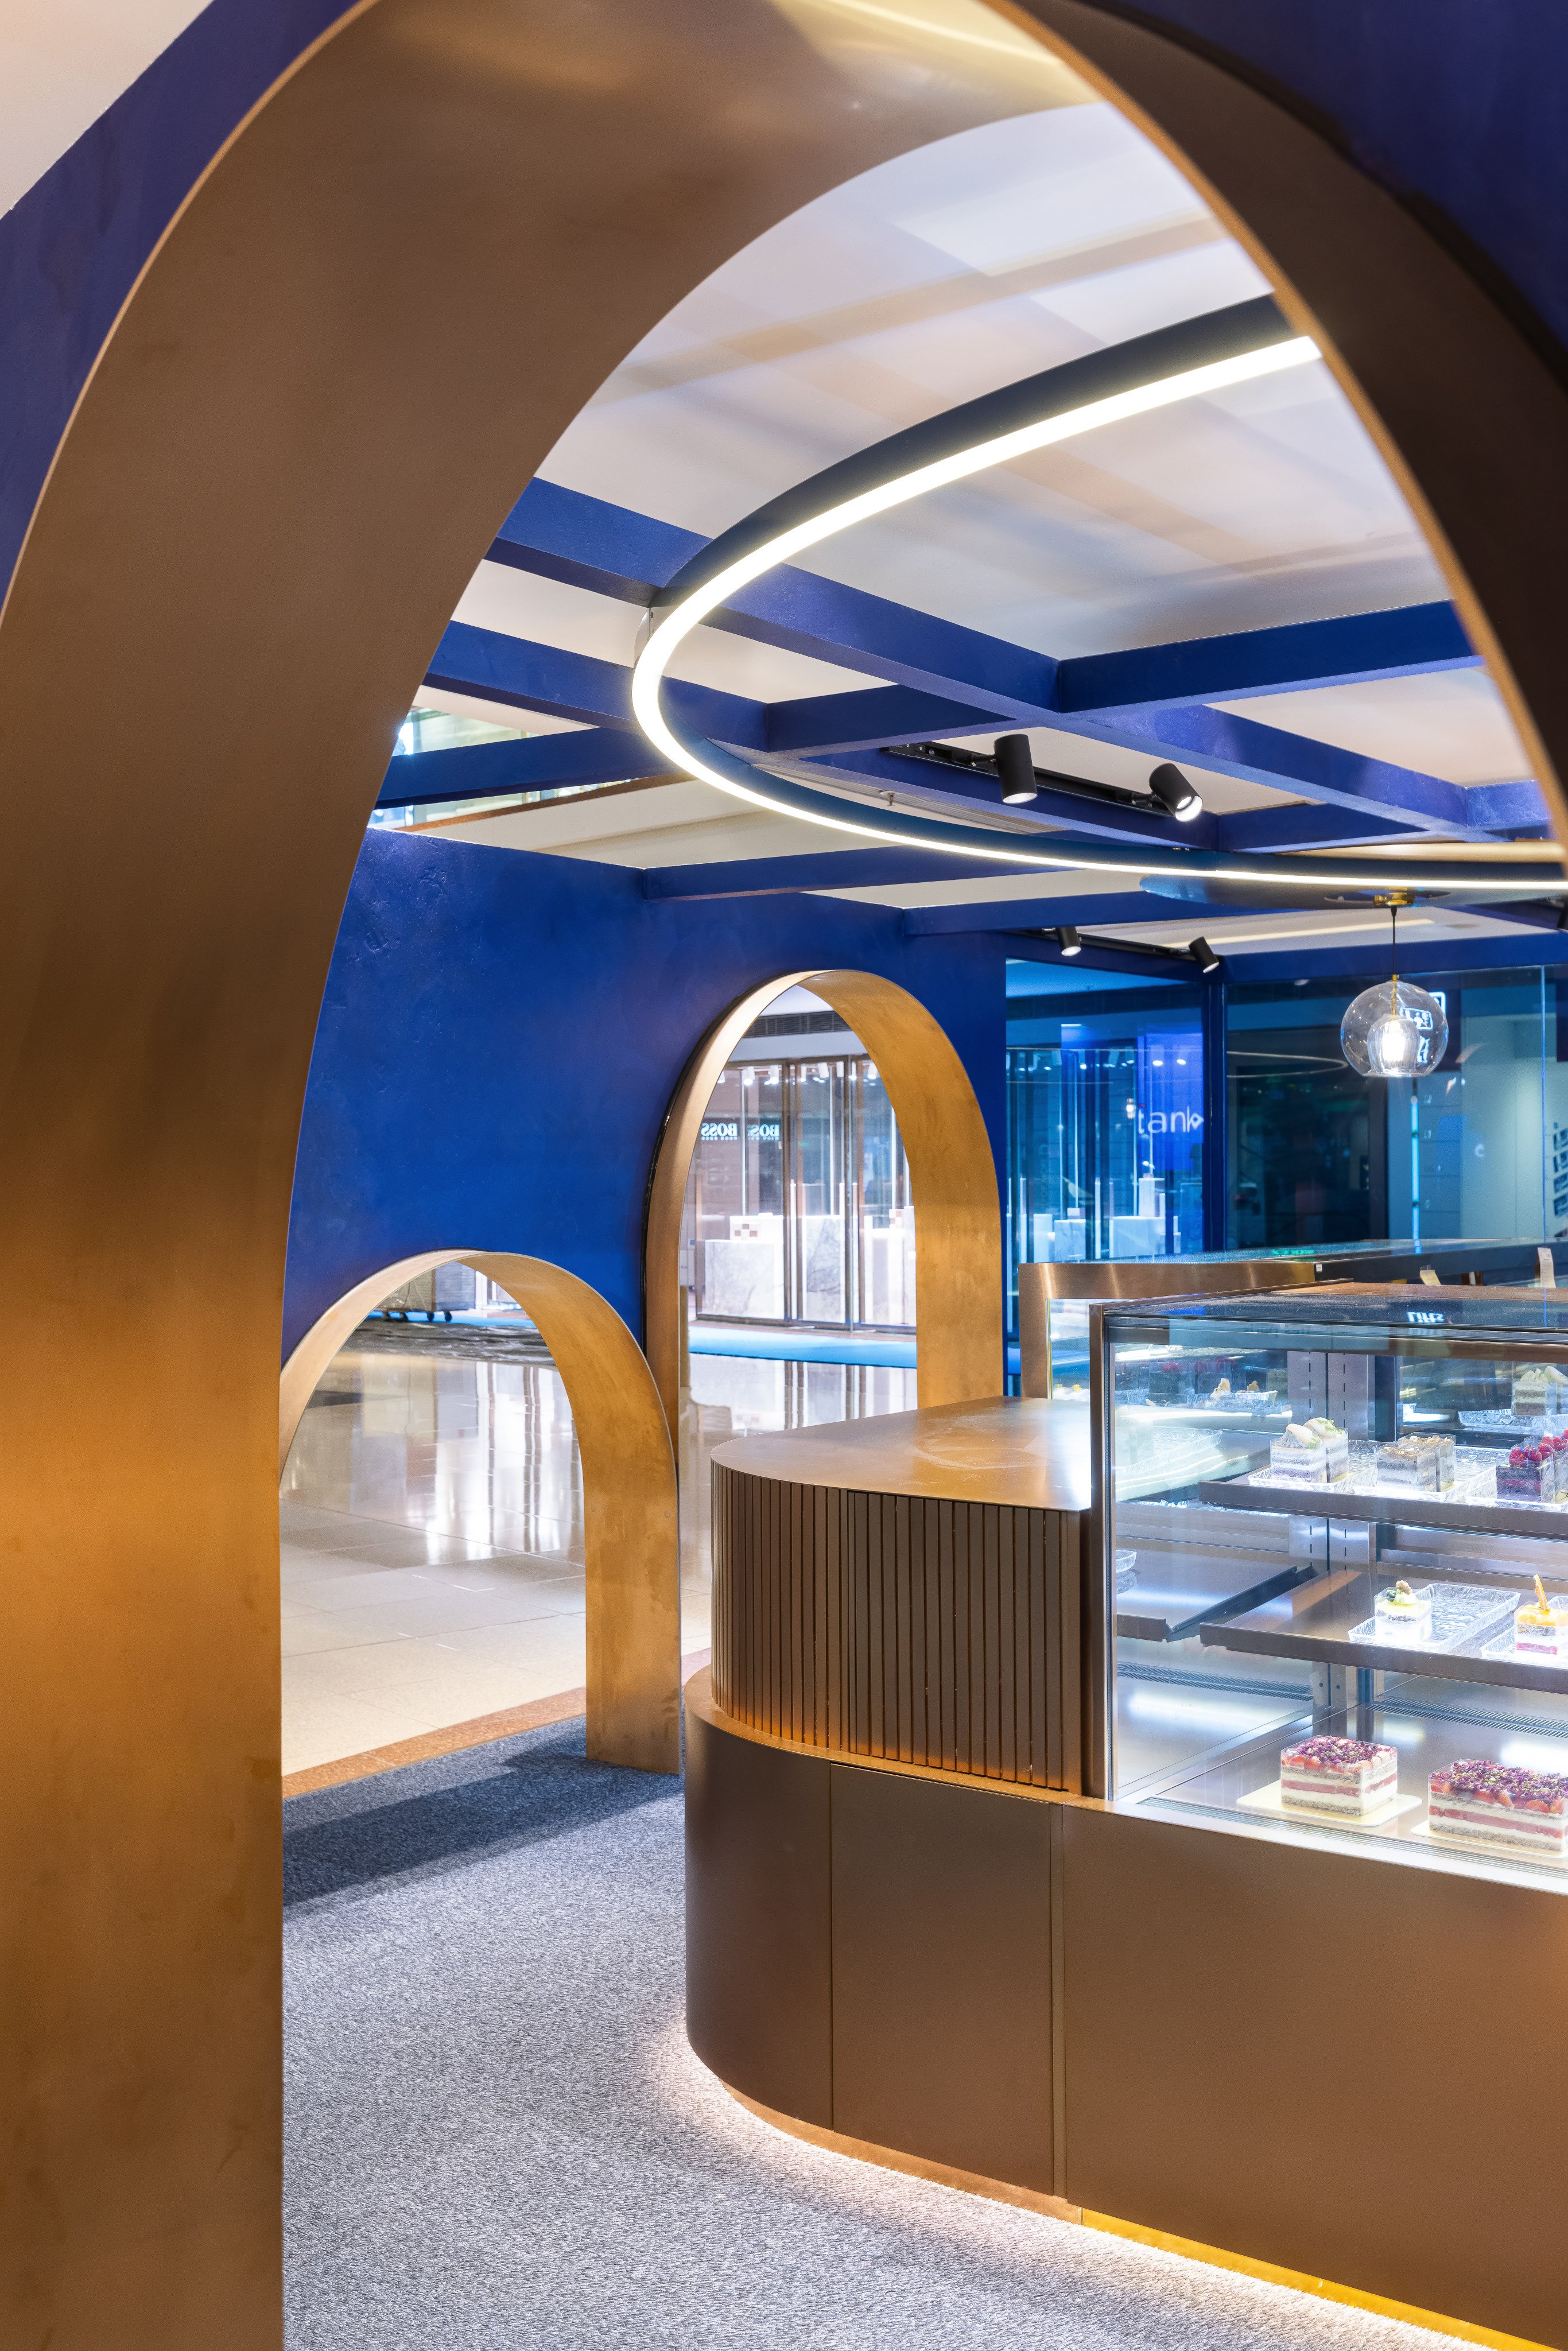 The Lifetastic patisserie pop-up store in Festival Walk, Hong Kong, designed by Max Lam Designs.